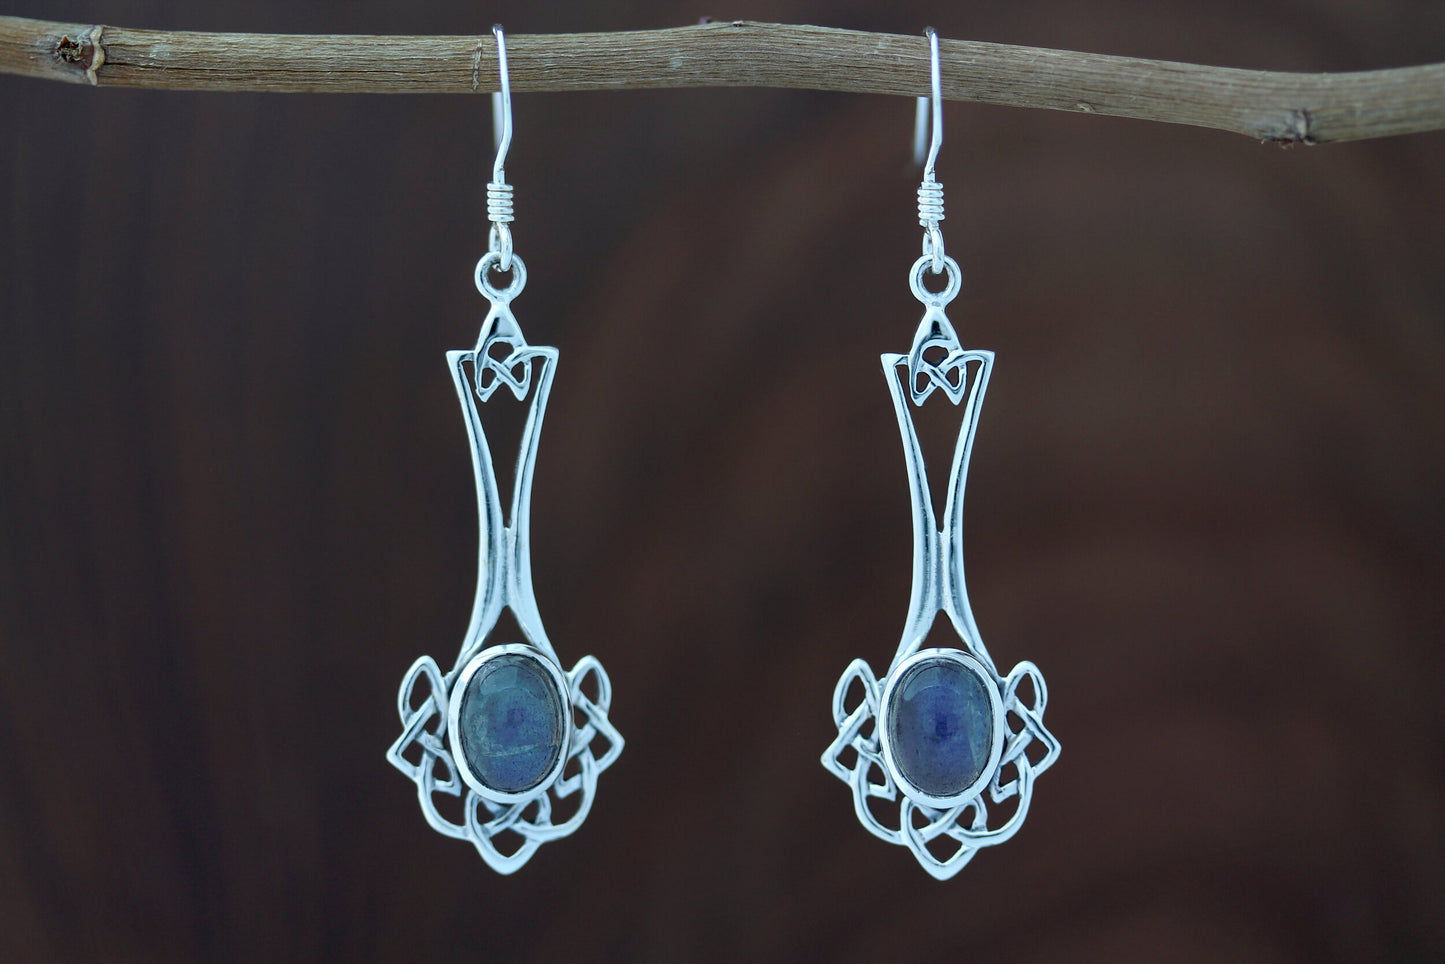 Celtic Knot Earrings - Long Knotted Drop with Labradorite